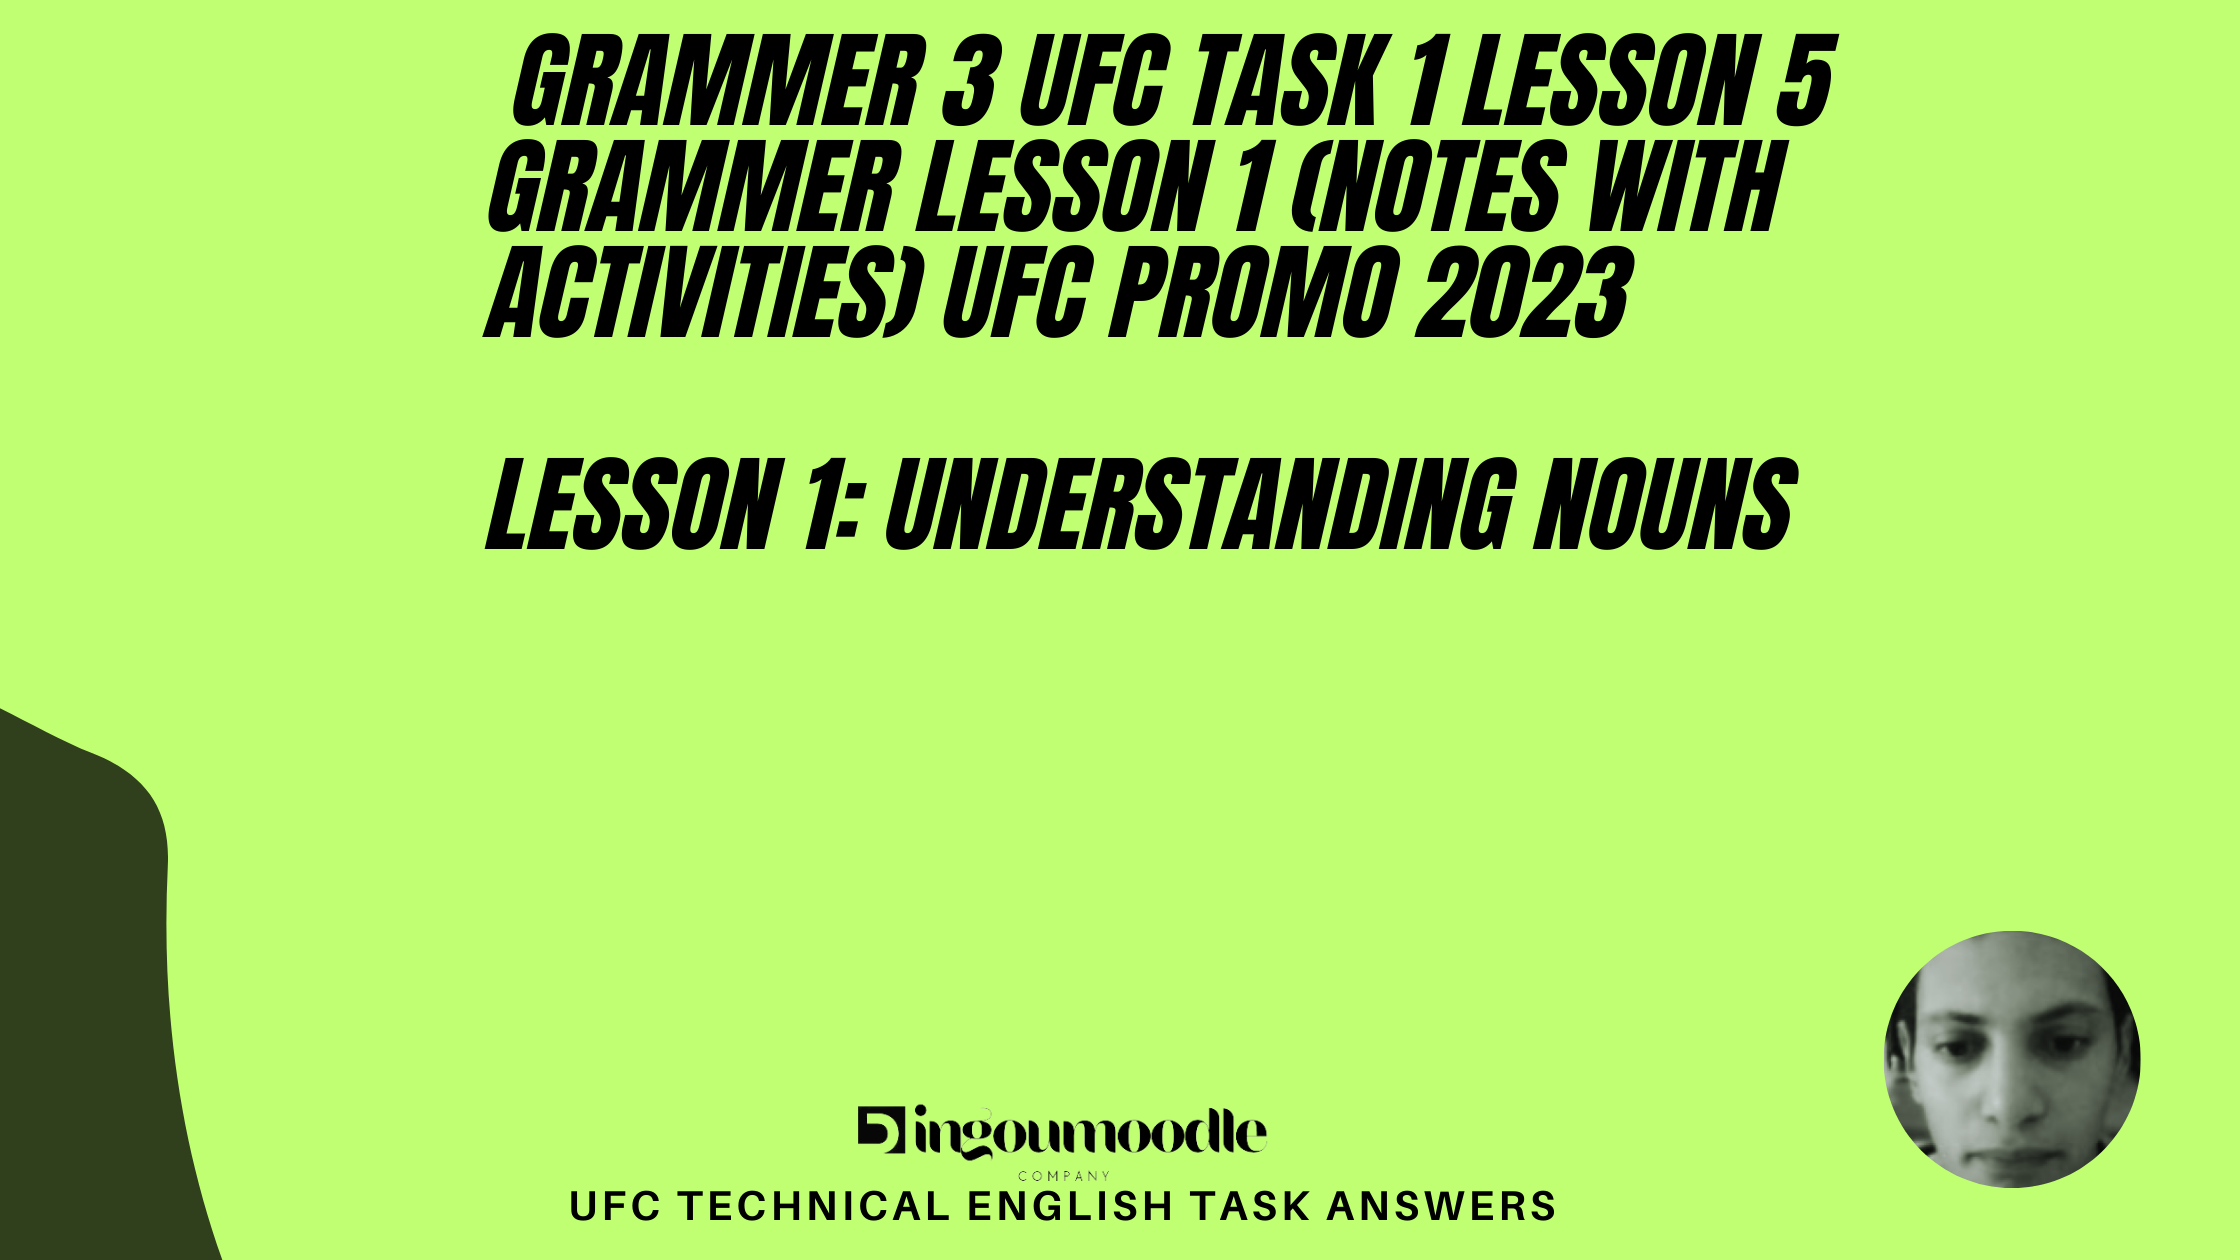 Grammar lesson 1 (Notes with activities) UFC promo 2023